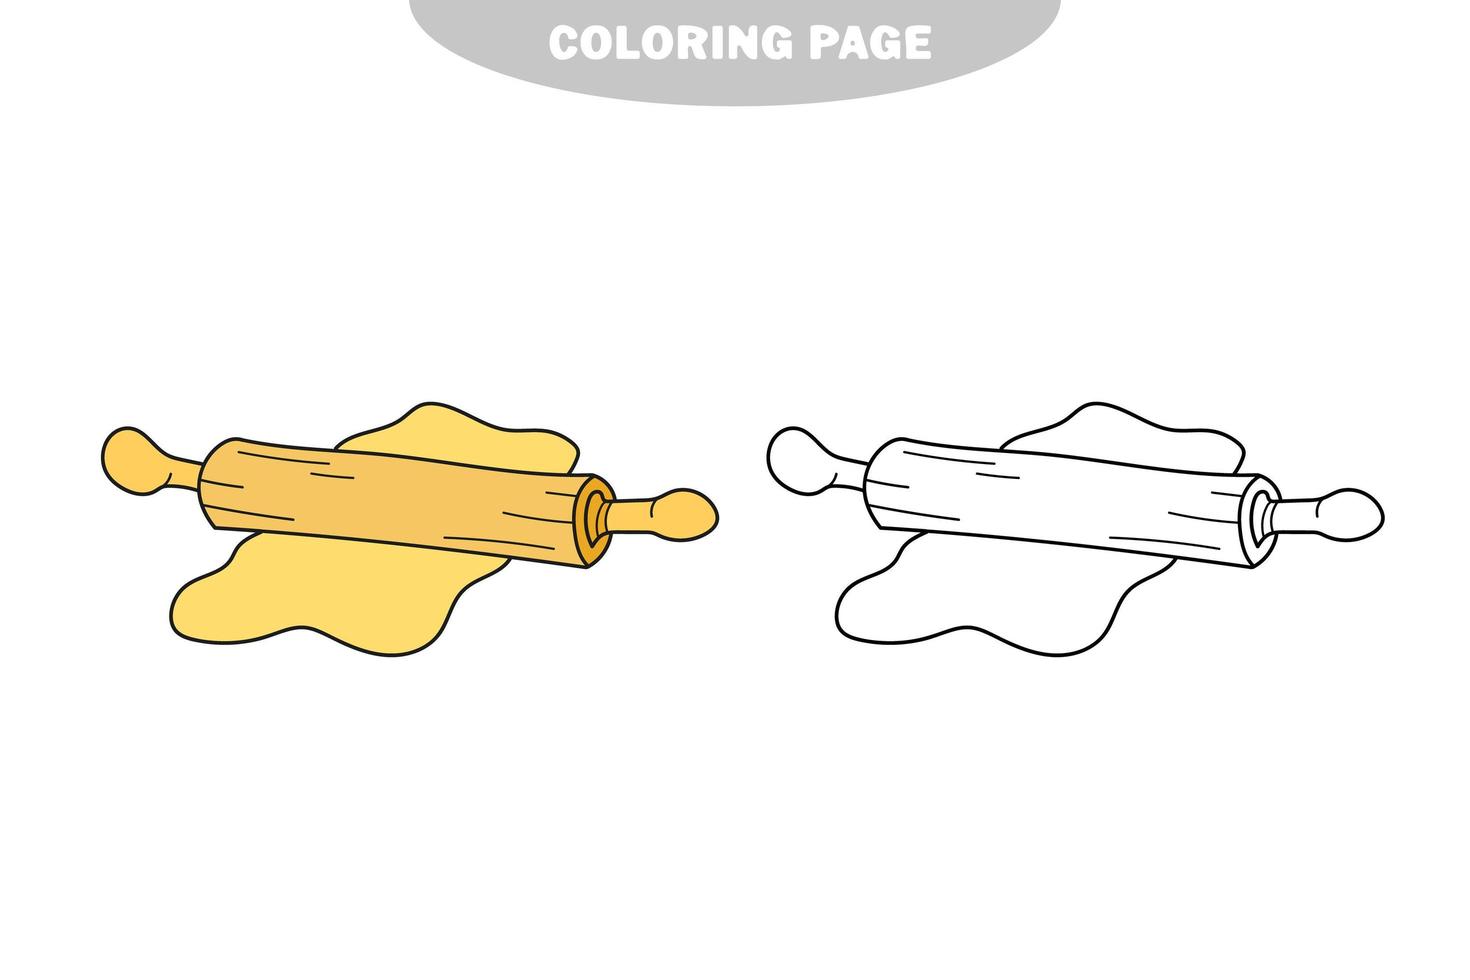 Simple coloring page. Coloring book for kids. Kitchen - Rolling pin and dough vector